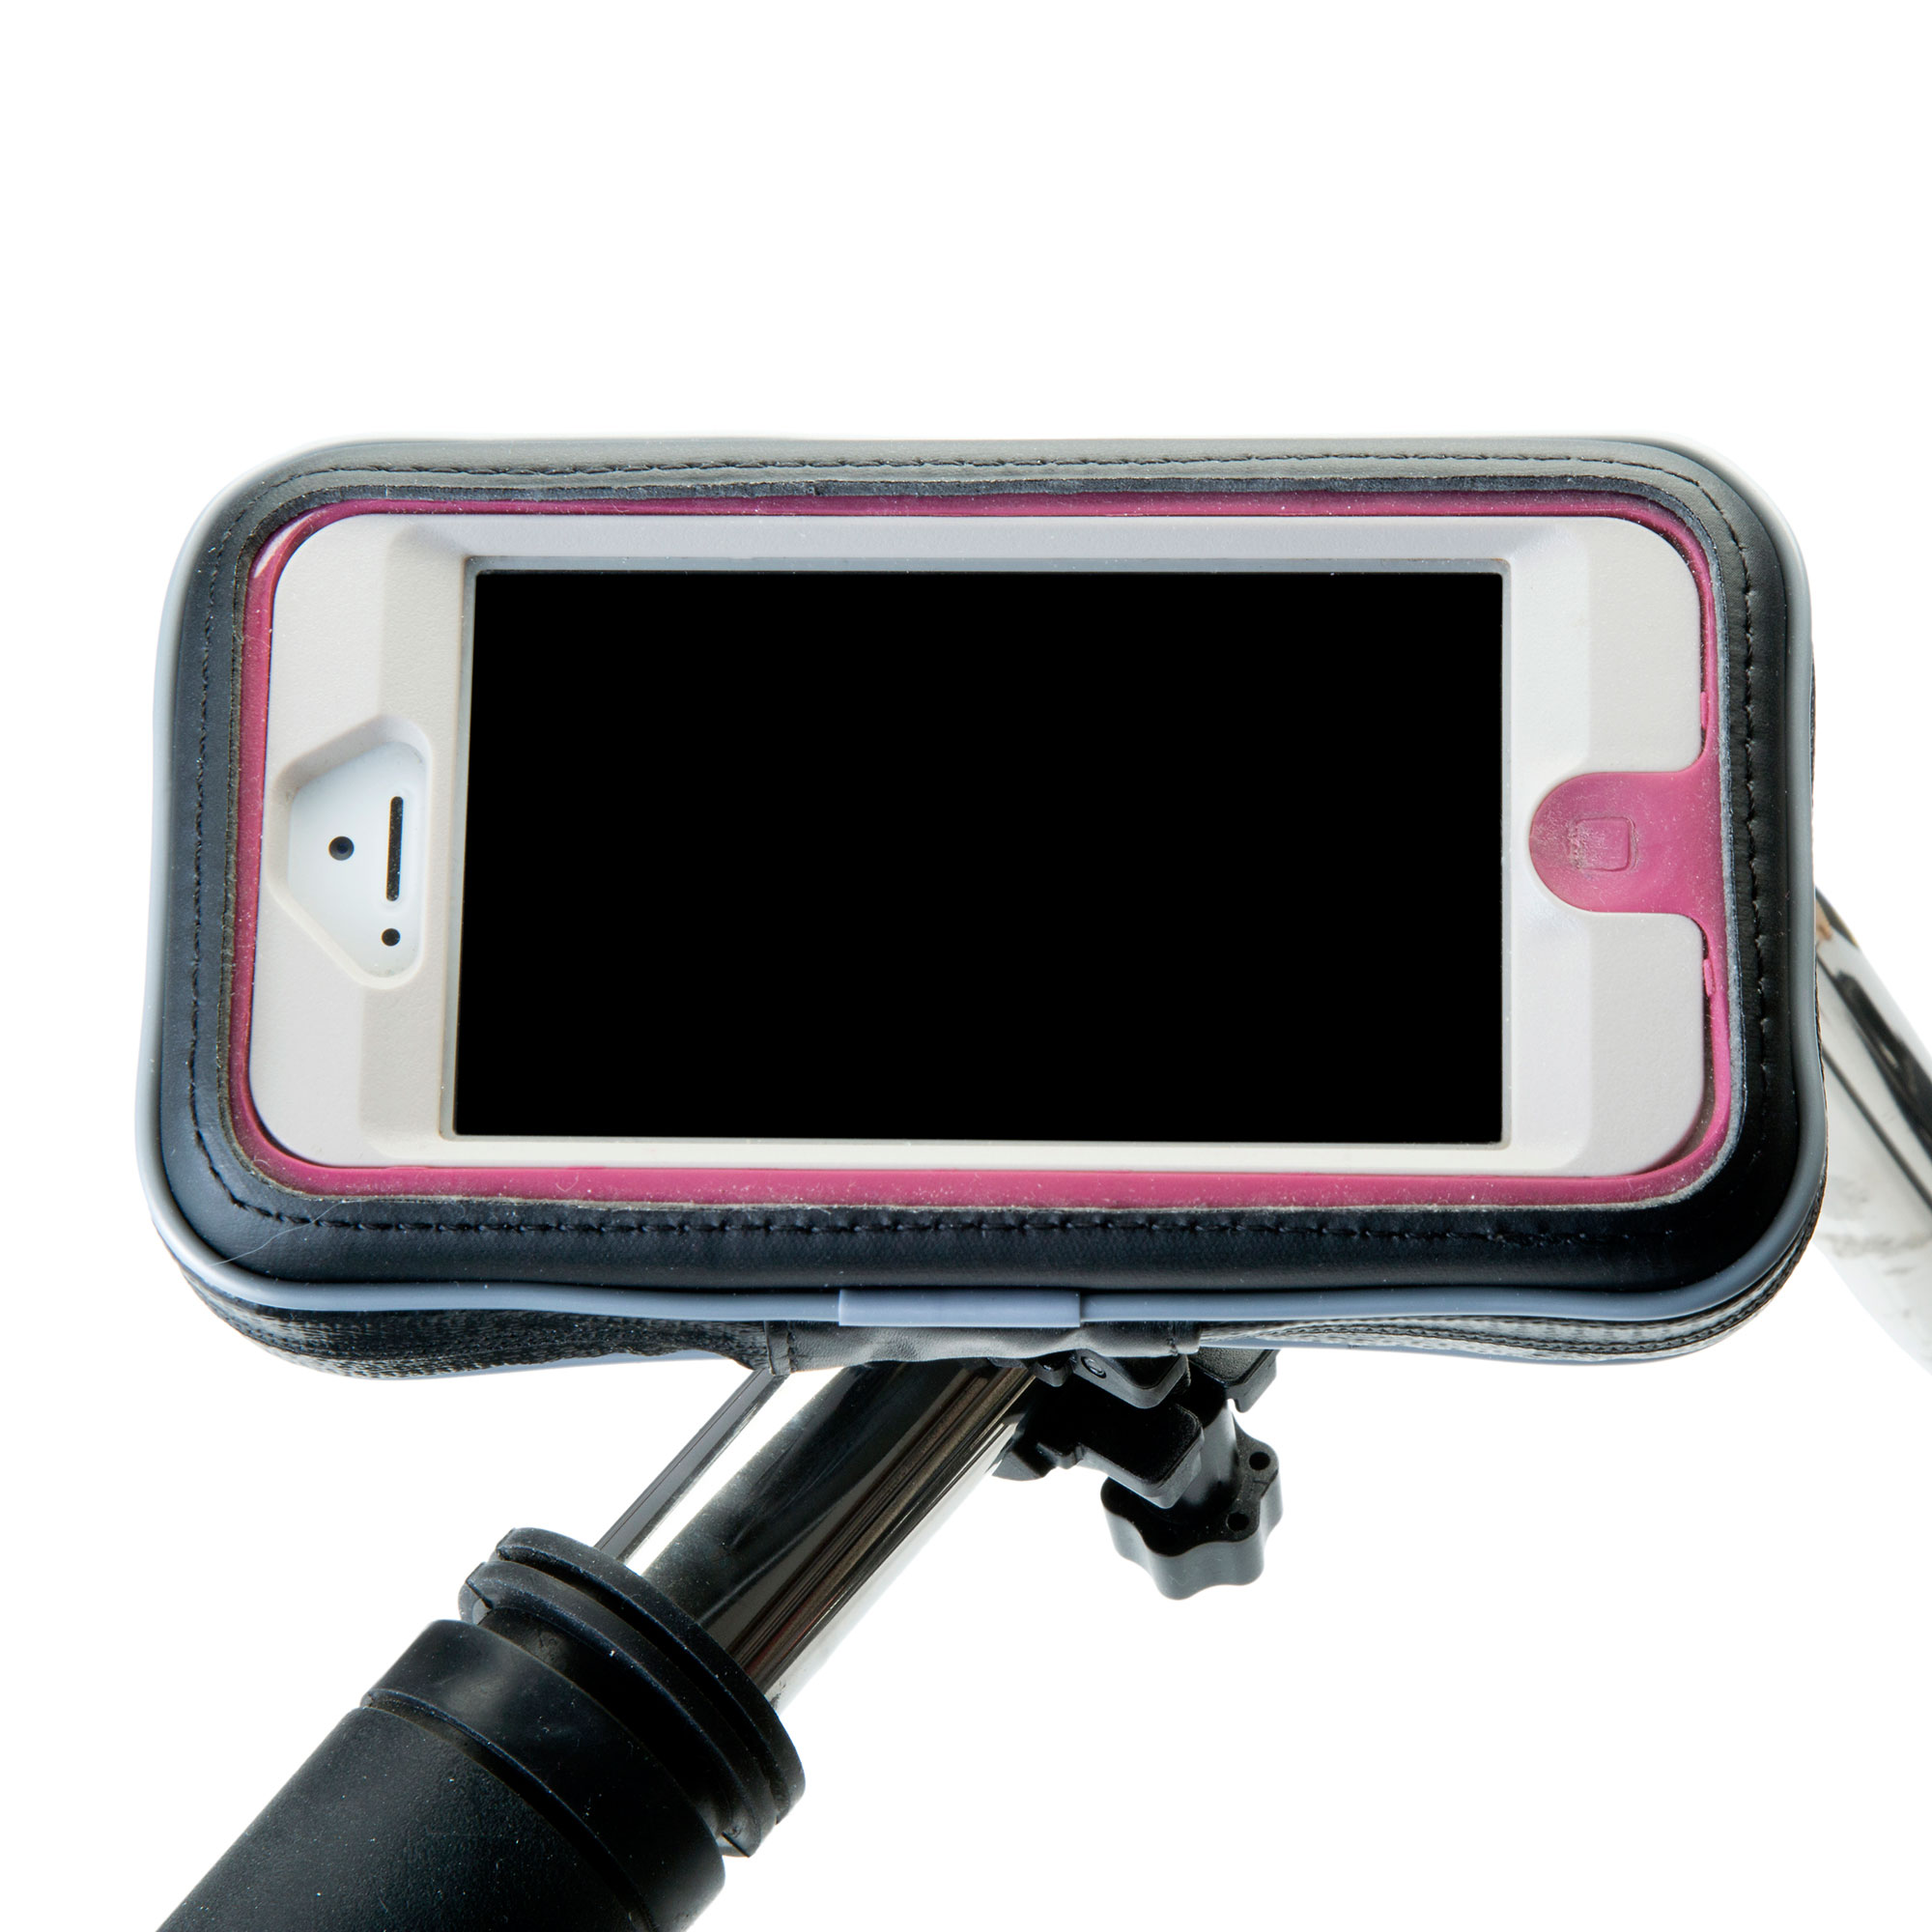 Heavy Duty Weather Resistant Bicycle / Motorcycle Handlebar Mount Holder Designed for the Sony Ericsson Cedar / Cedar A